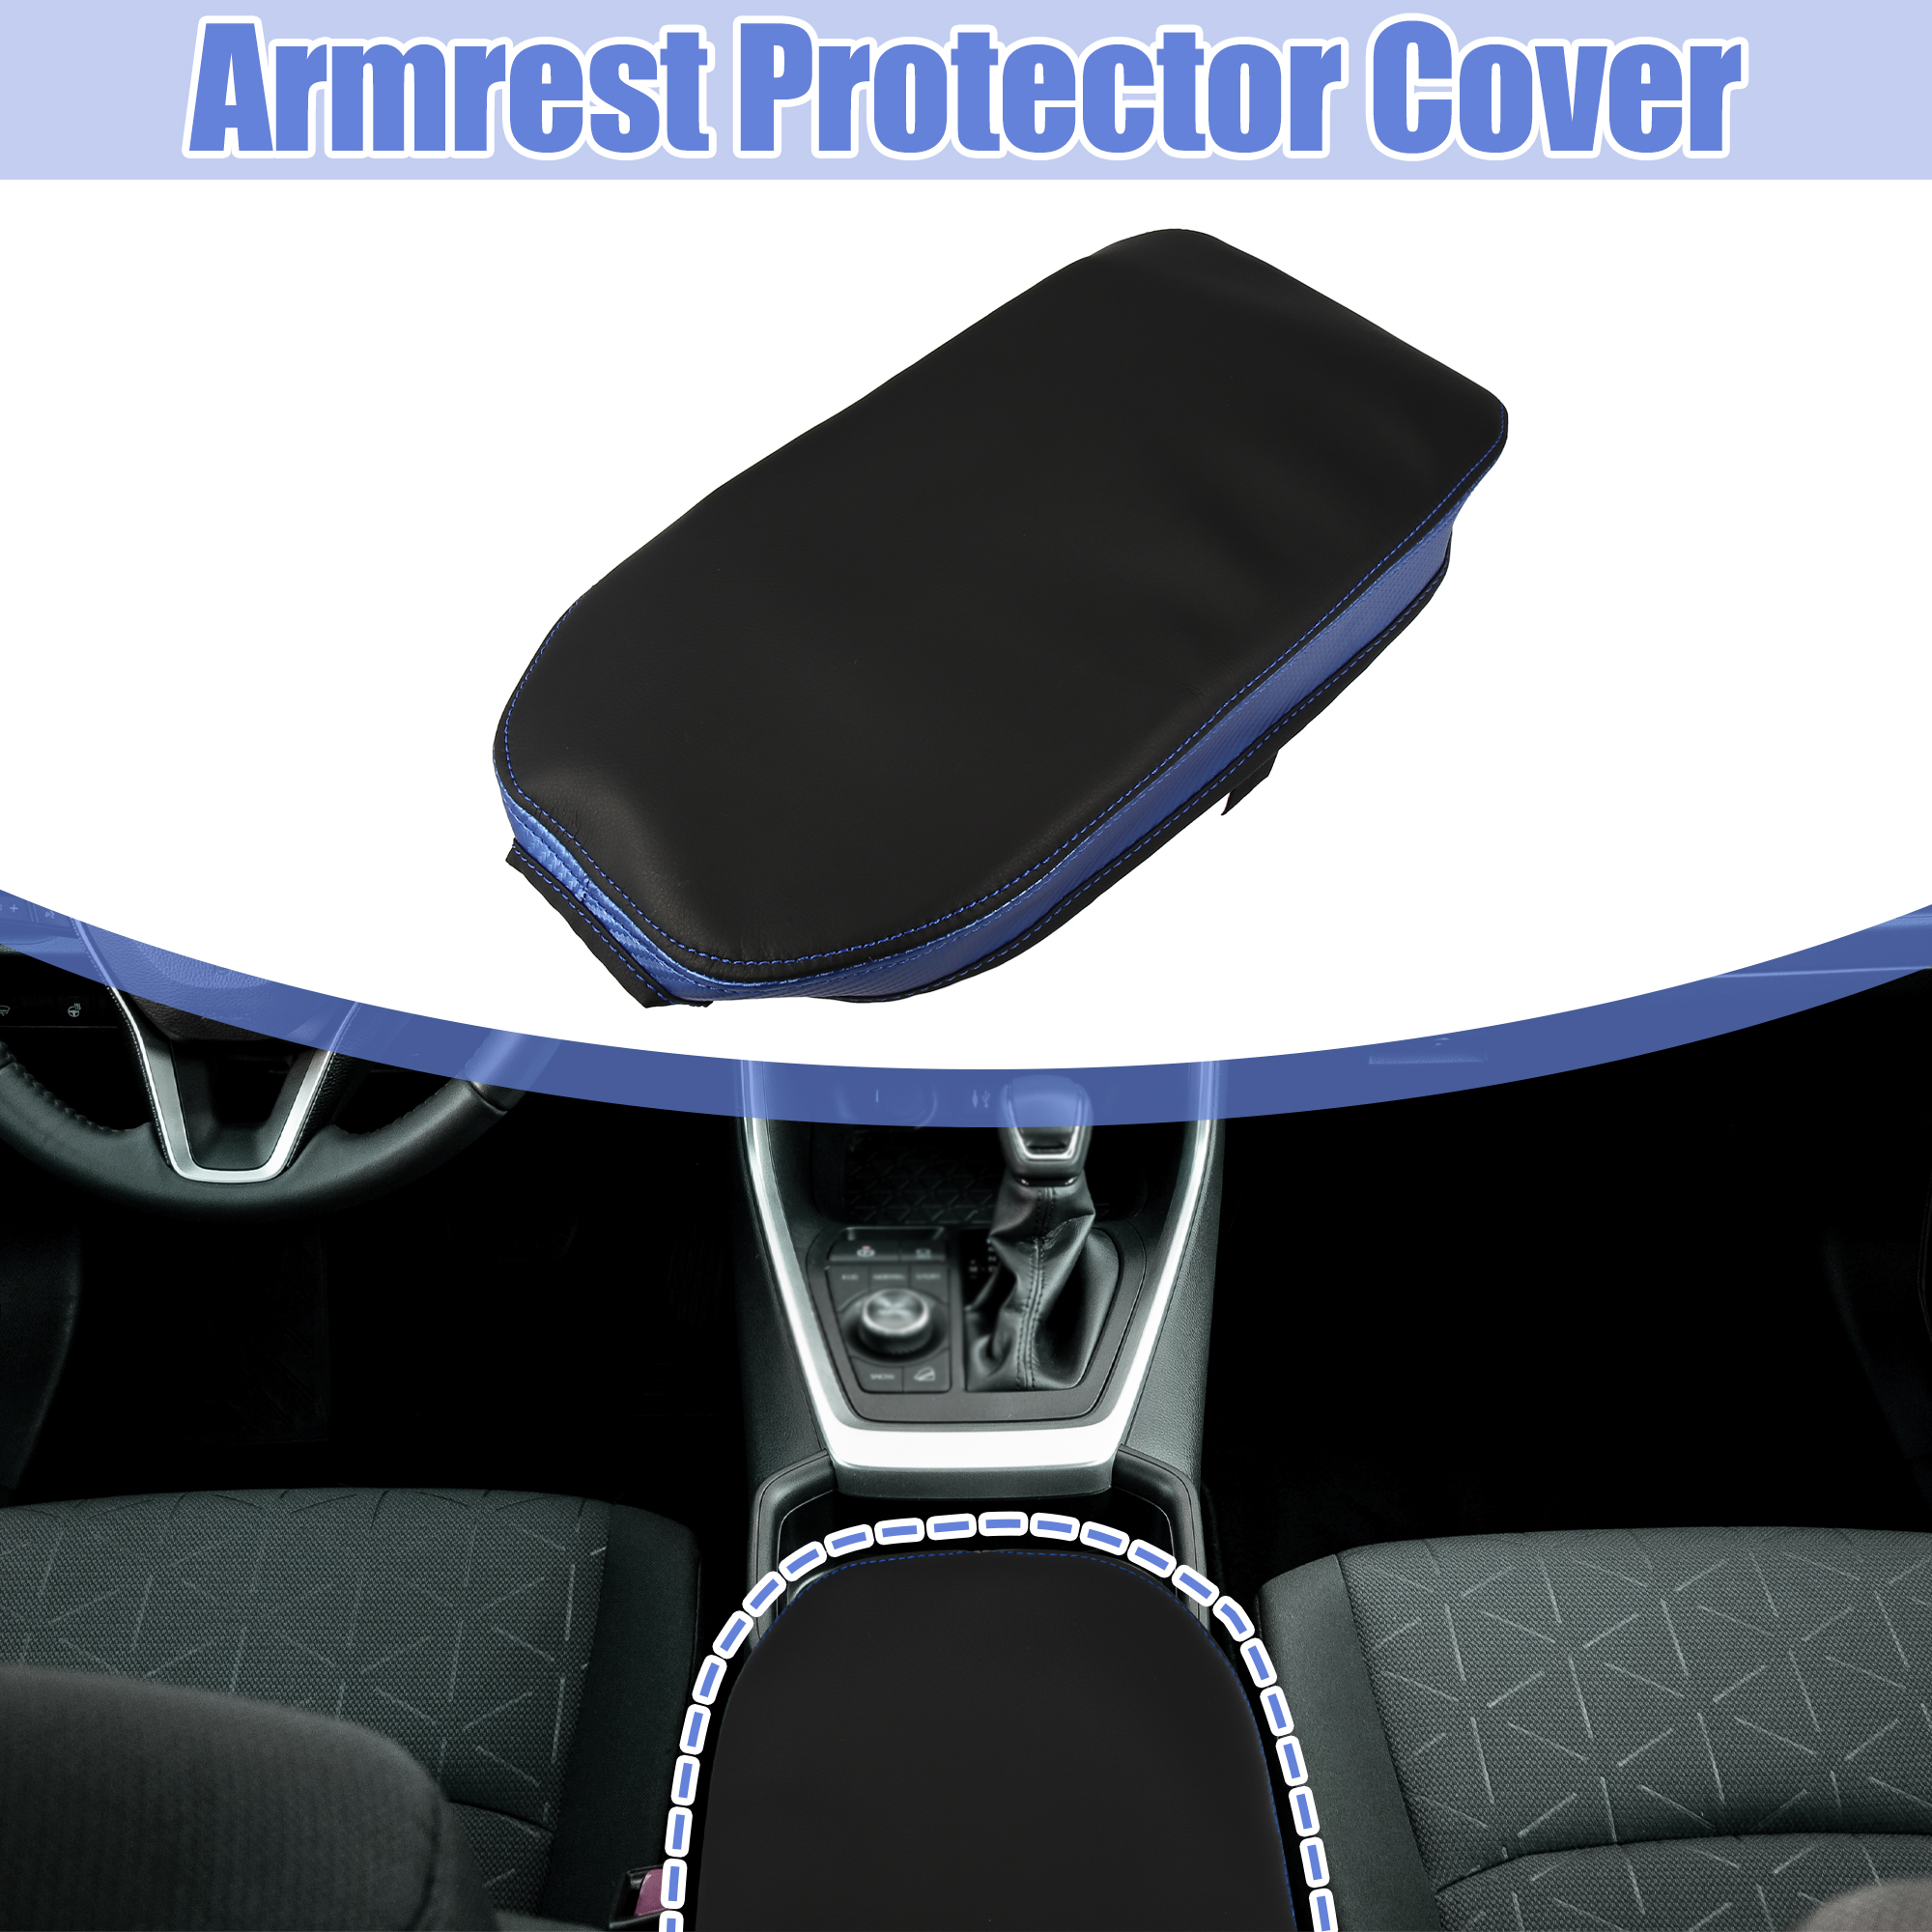 Unique Bargains PU Leather Car Armrest Seat Box Cover for Toyota RAV4 2019-2022 Black and Blue